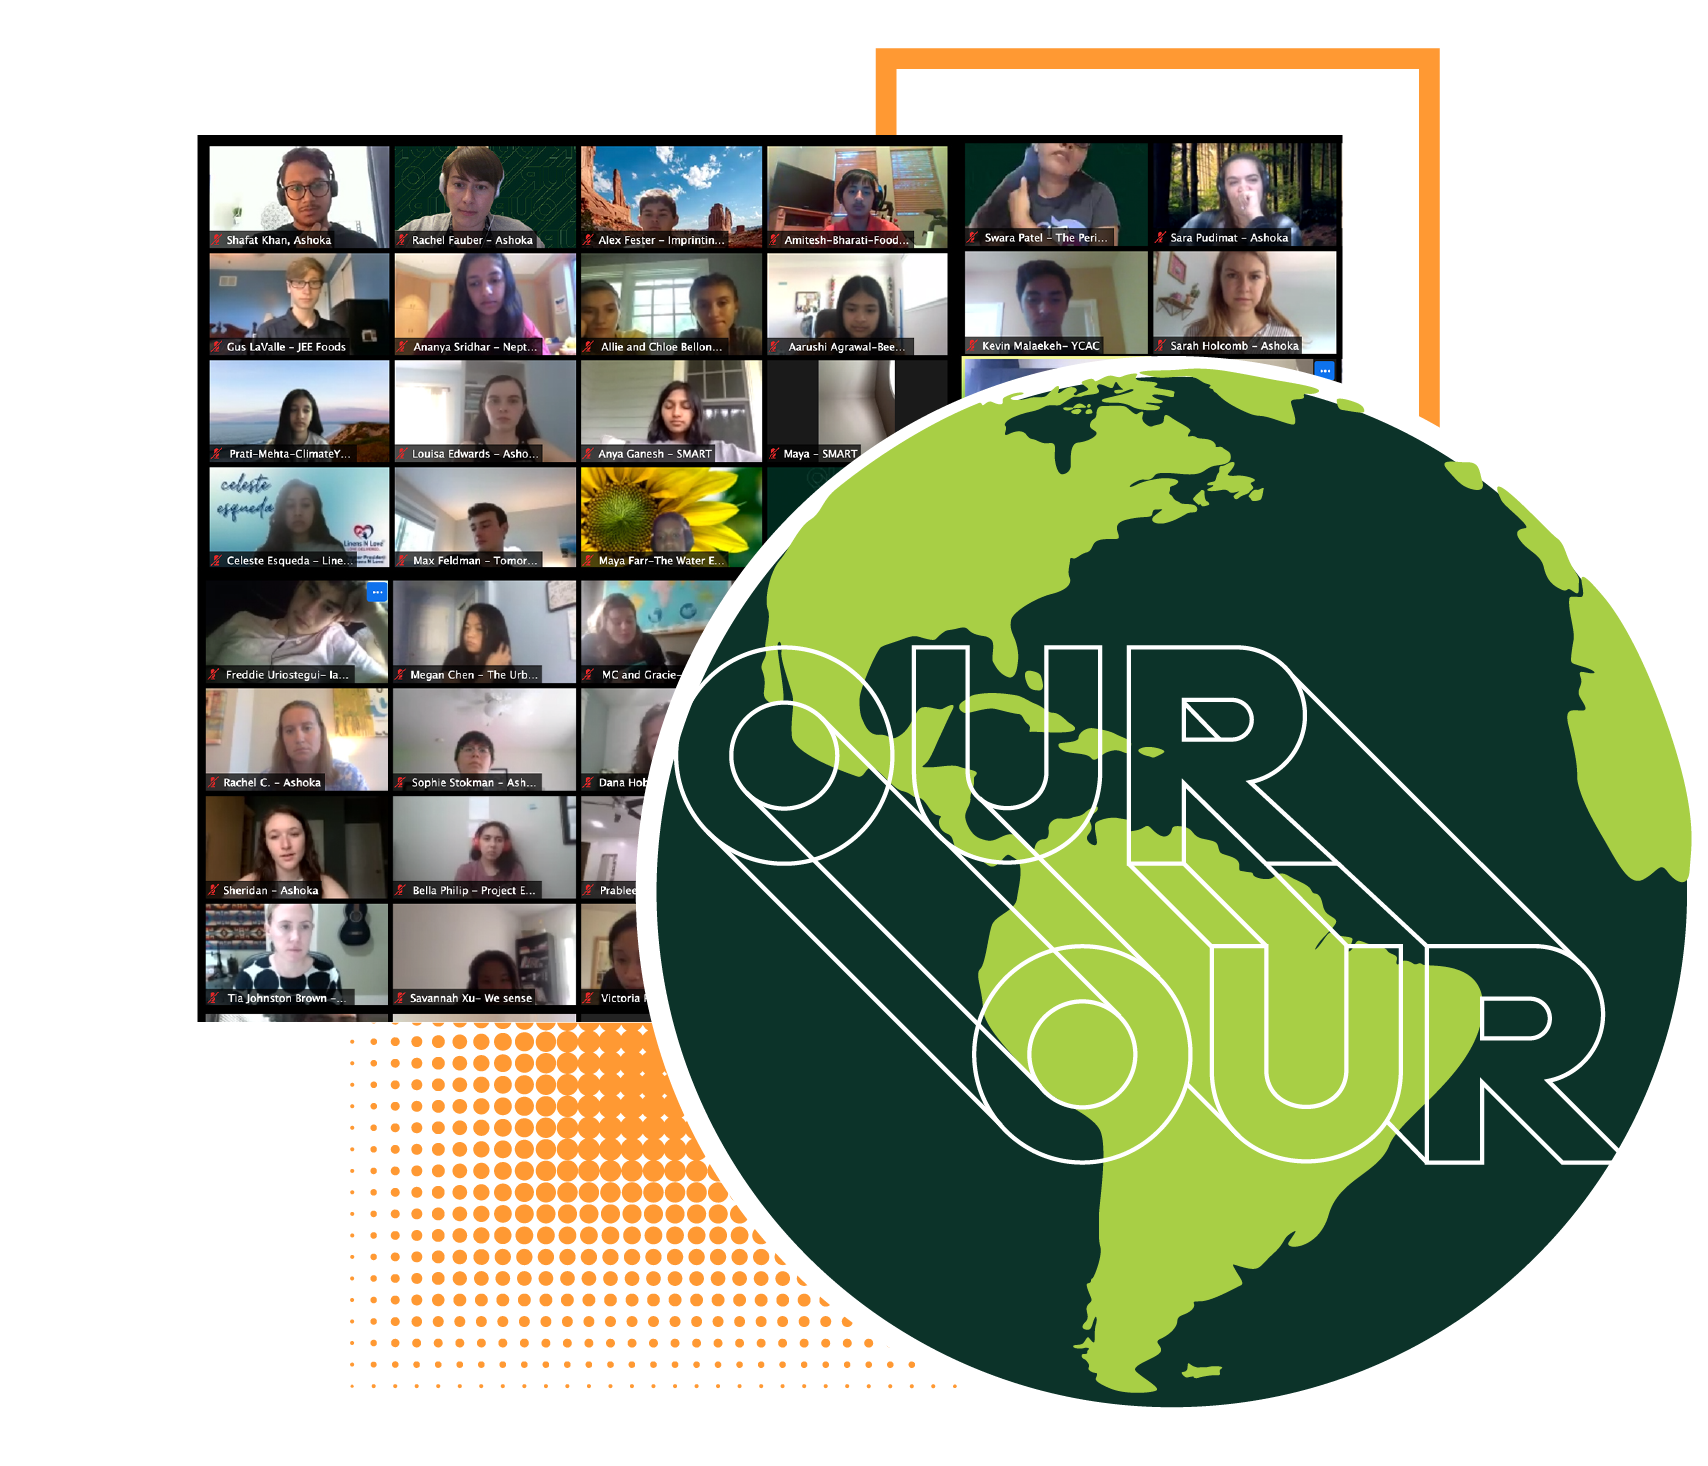 Collage representing the Changemaker Summit which includes lime green background, a graphic of the earth and the Zoom screen event.